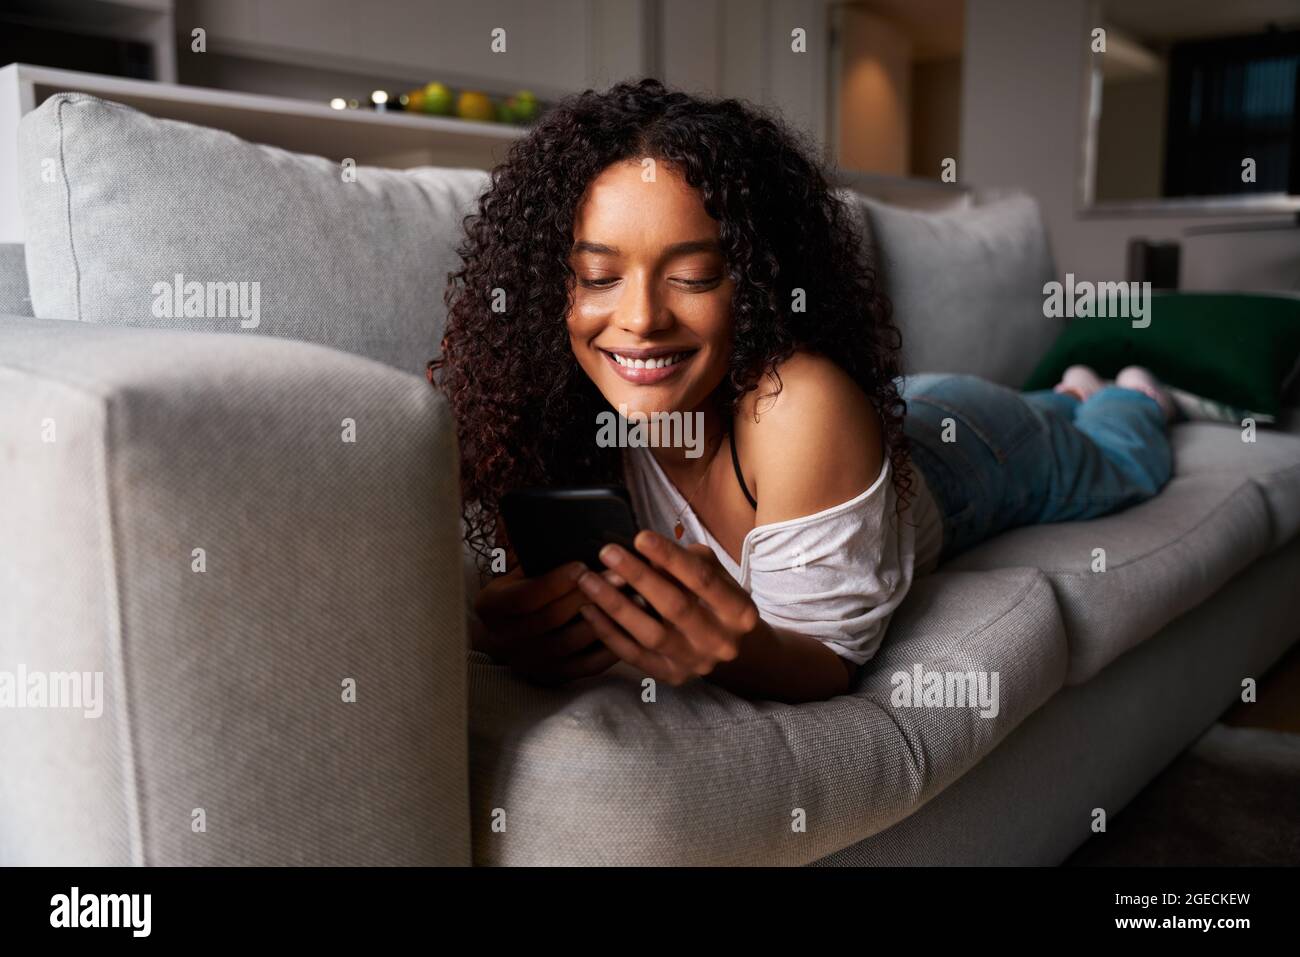 Mixed race female student relaxing on couch texting on cellular device Stock Photo